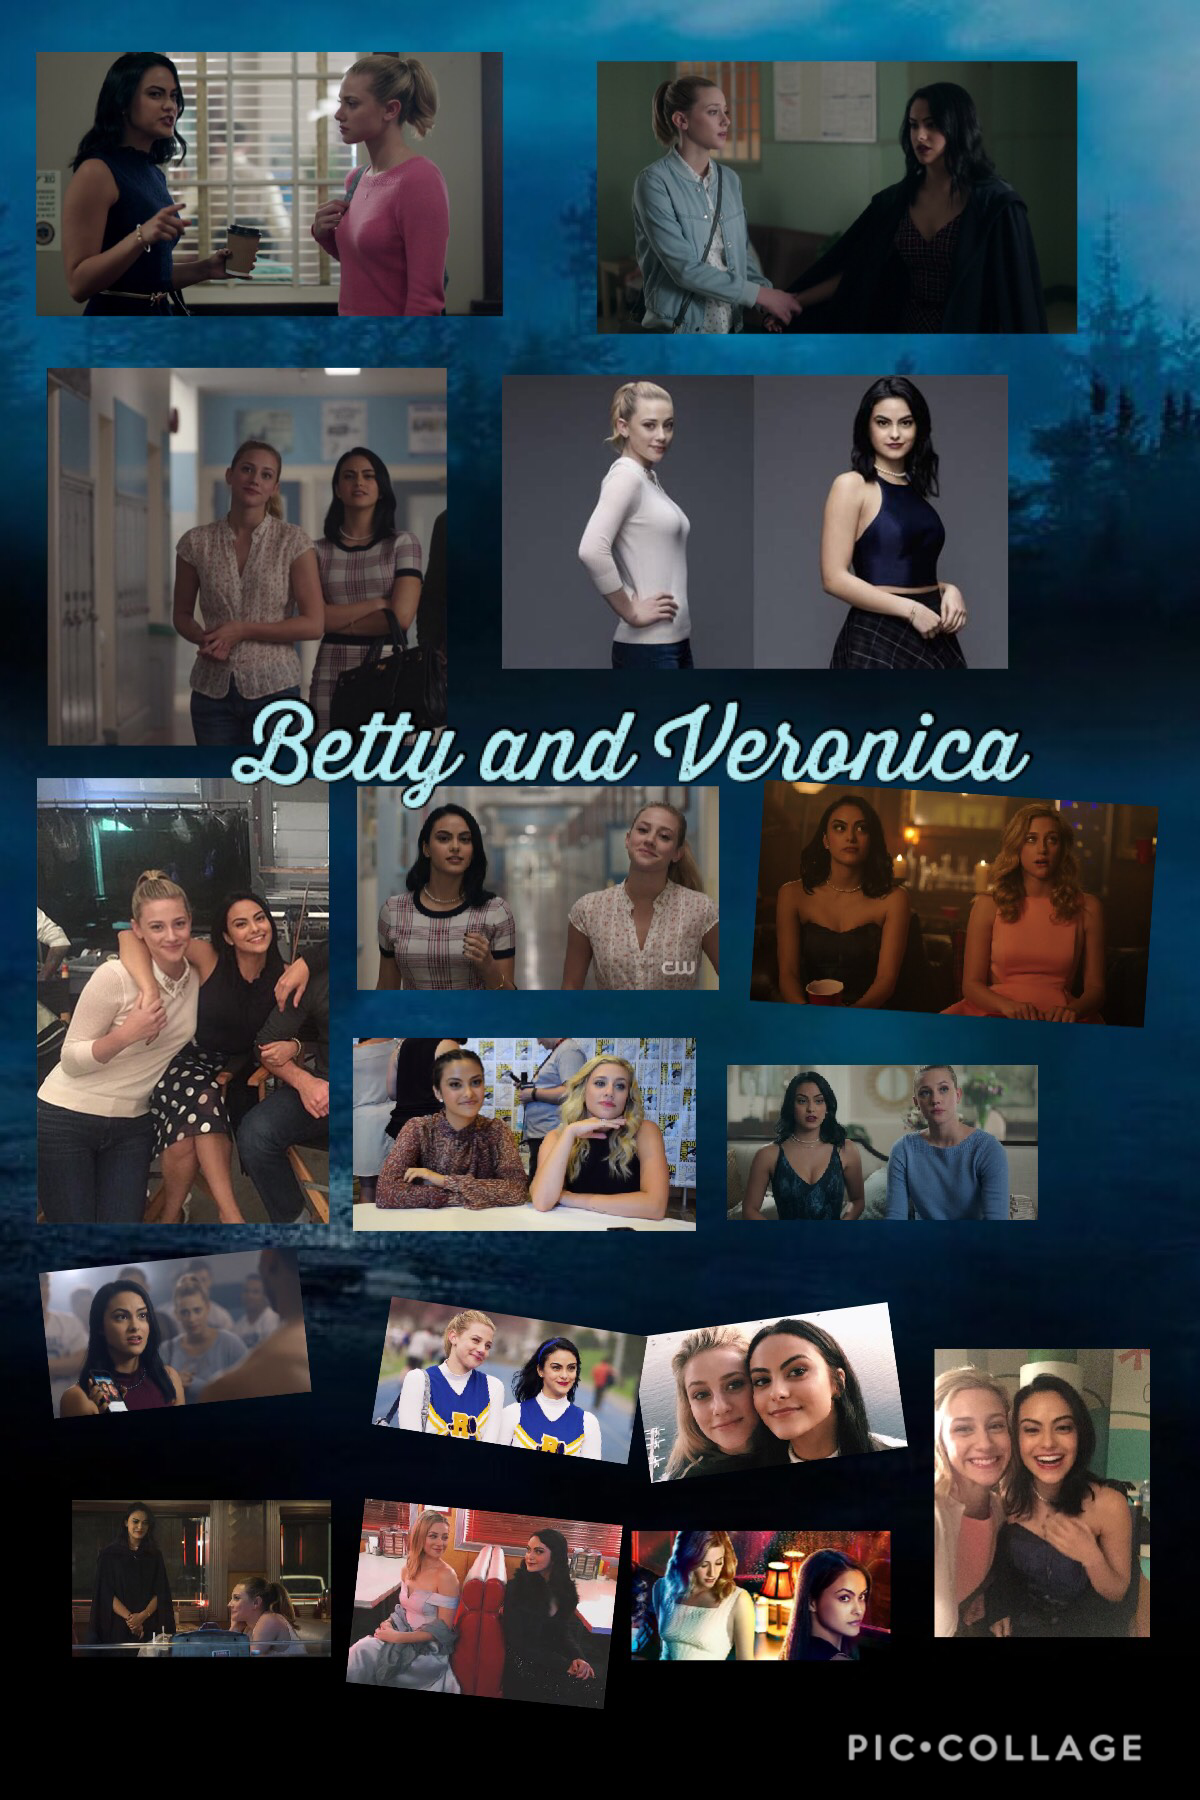 Betty and Veronica from riverdale Collage 